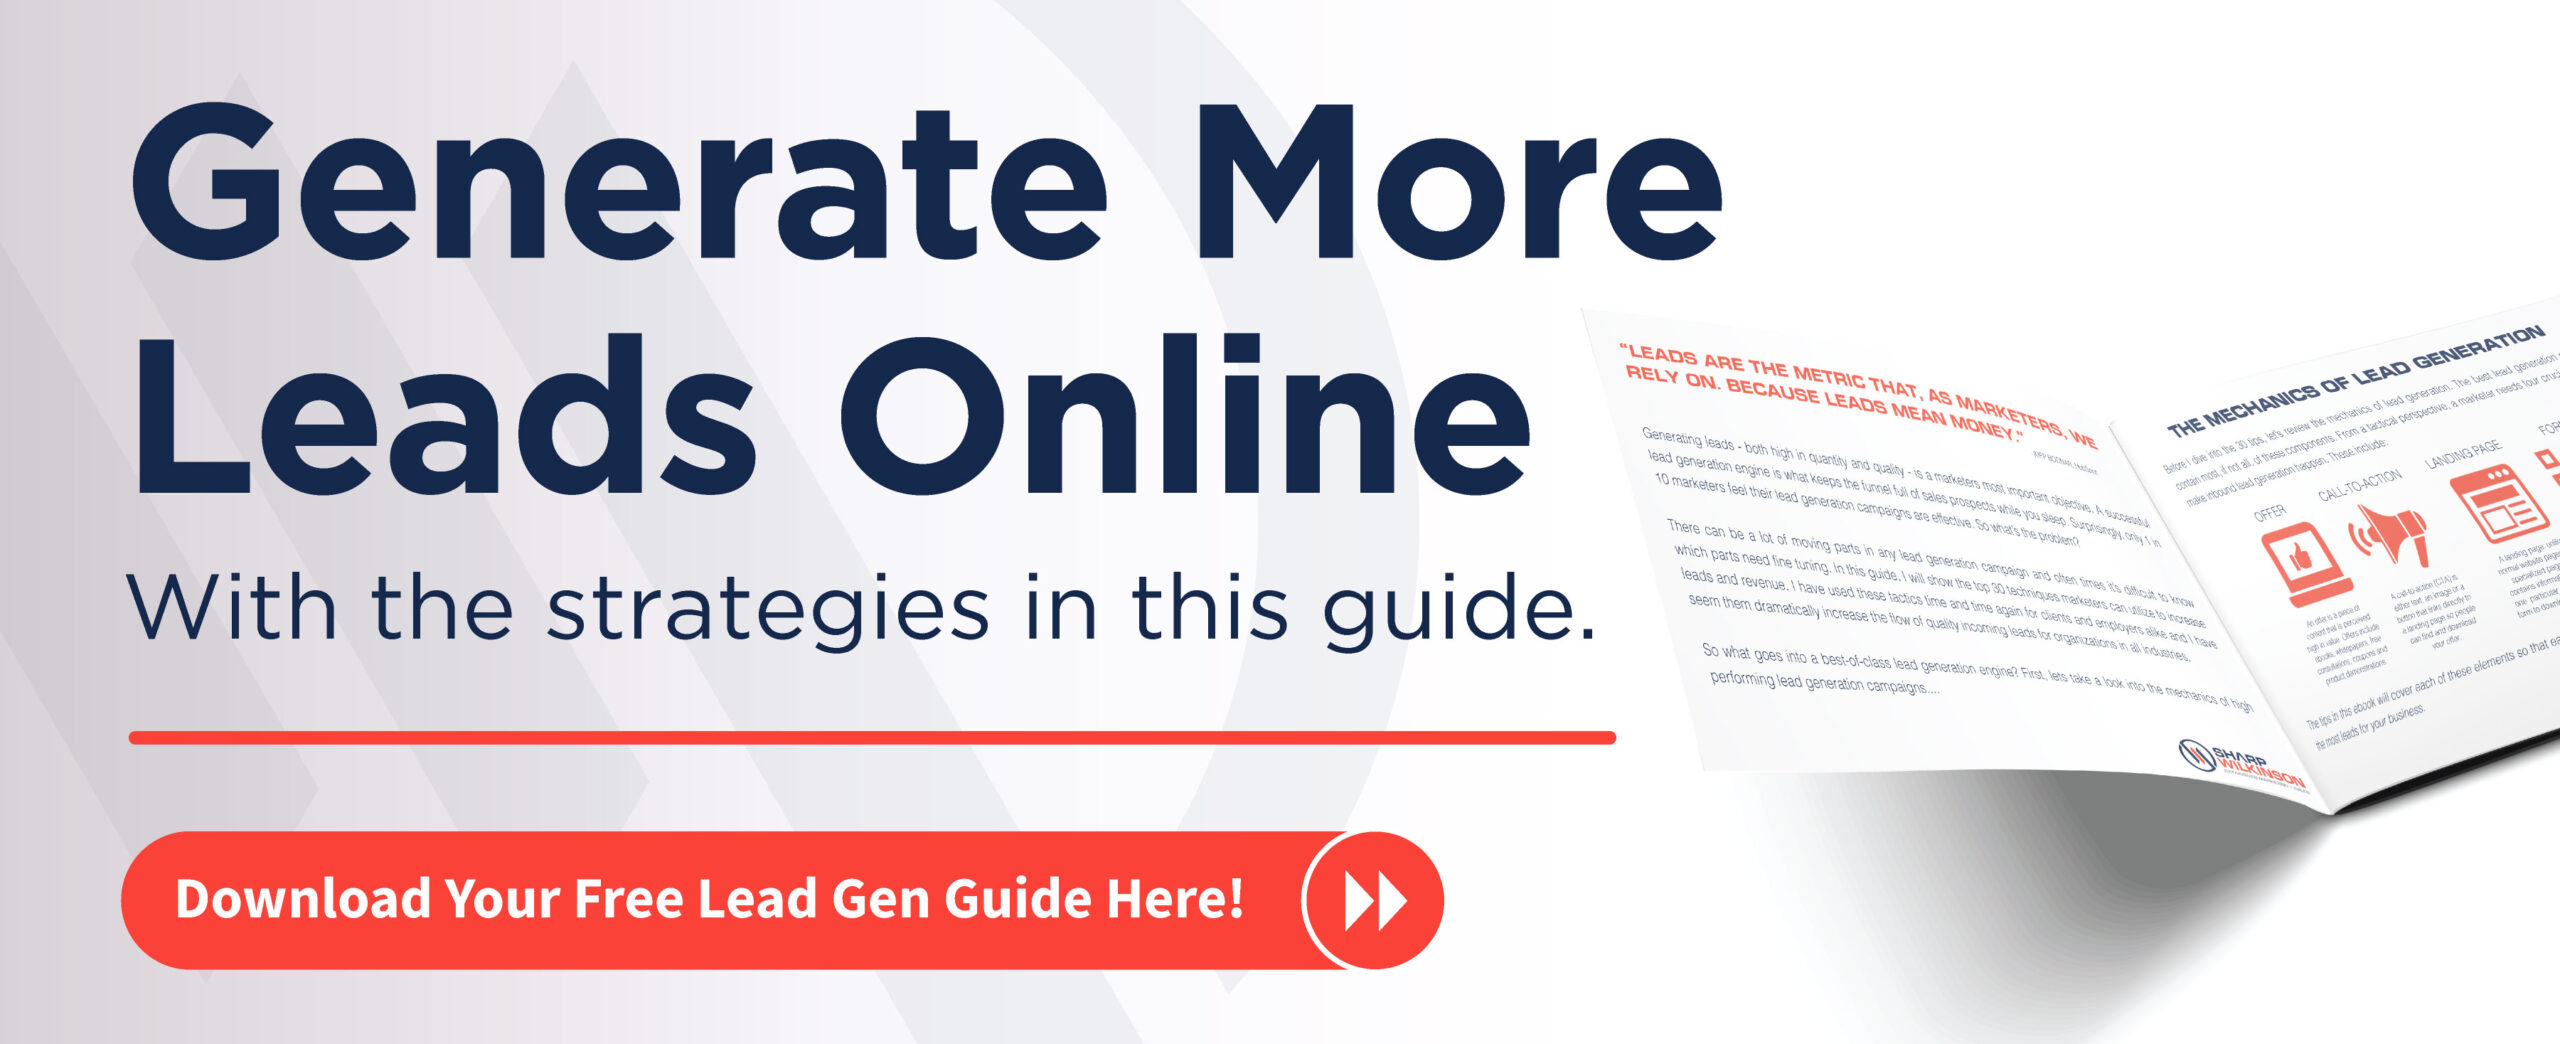 Generate more leads online with the strategies in this guide. Download your free lead gen guide here!